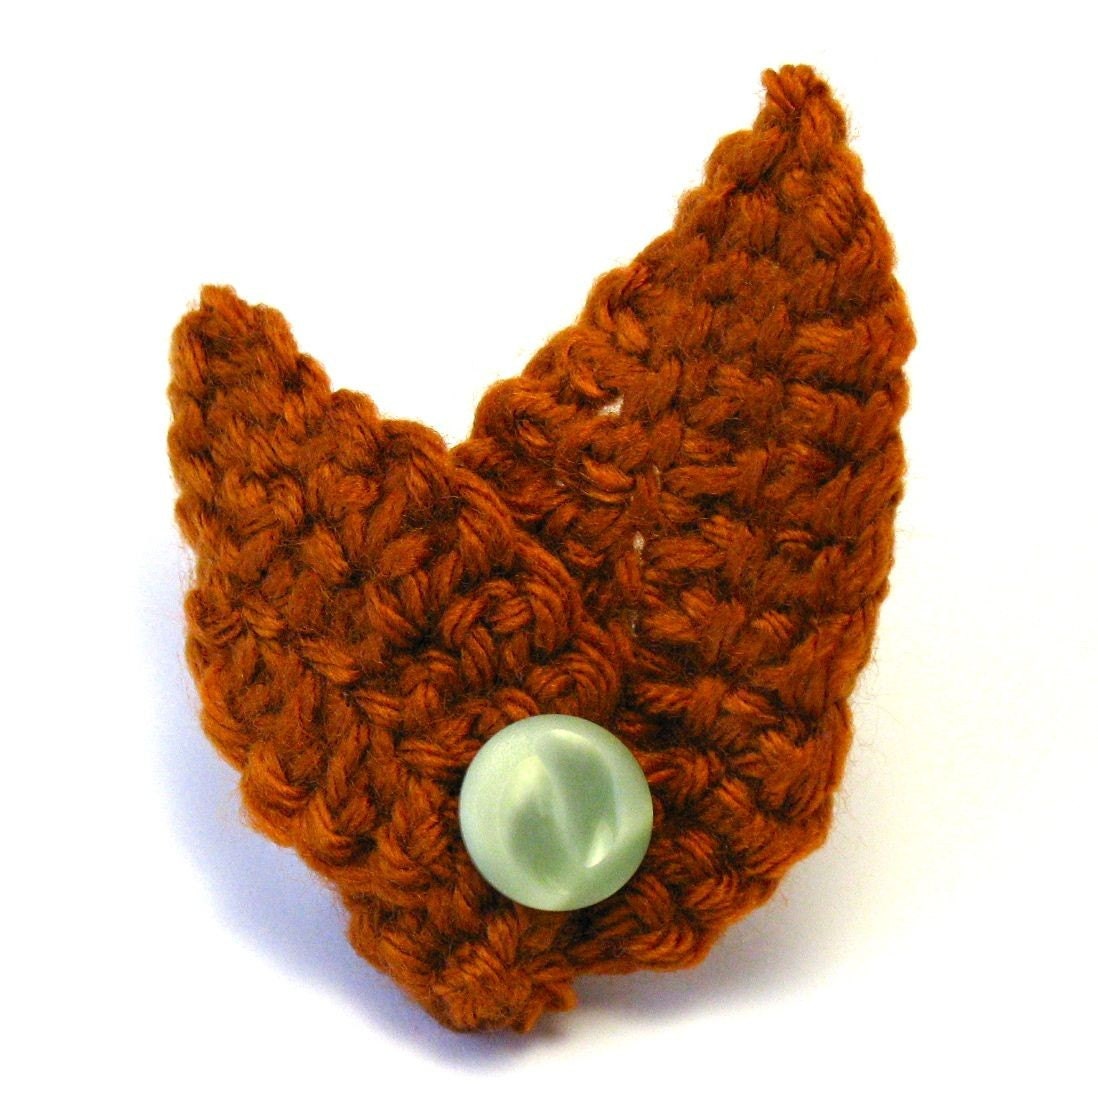 Crocheted Cozy Leaf Pin, Pumpkin with Vintage Green Button